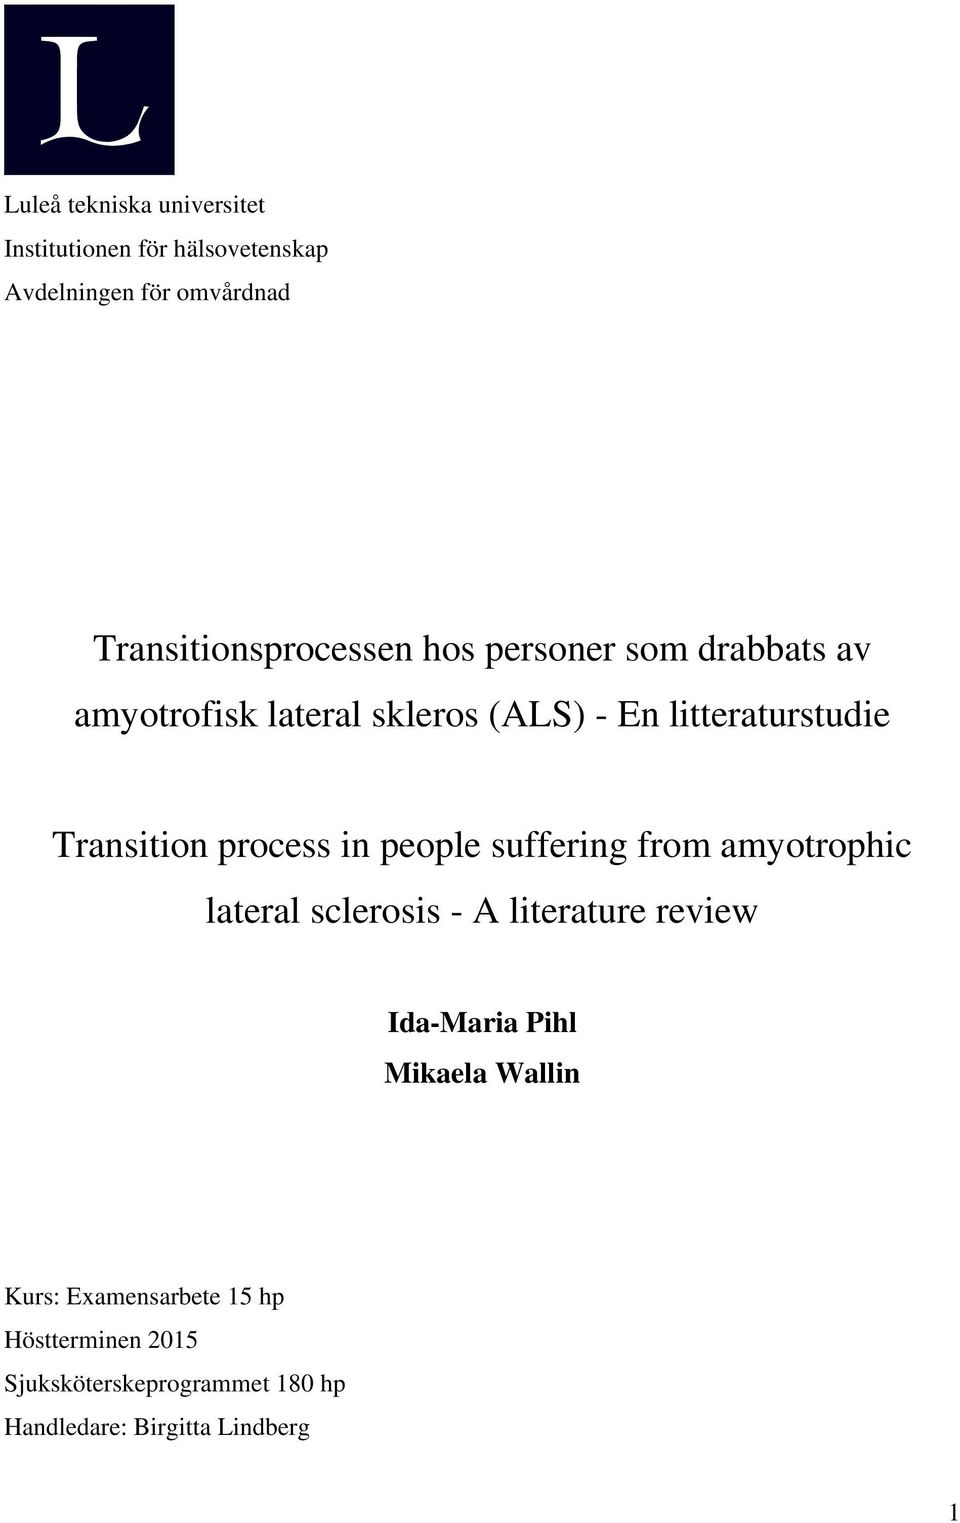 Transition process in people suffering from amyotrophic lateral sclerosis - A literature review Ida-Maria